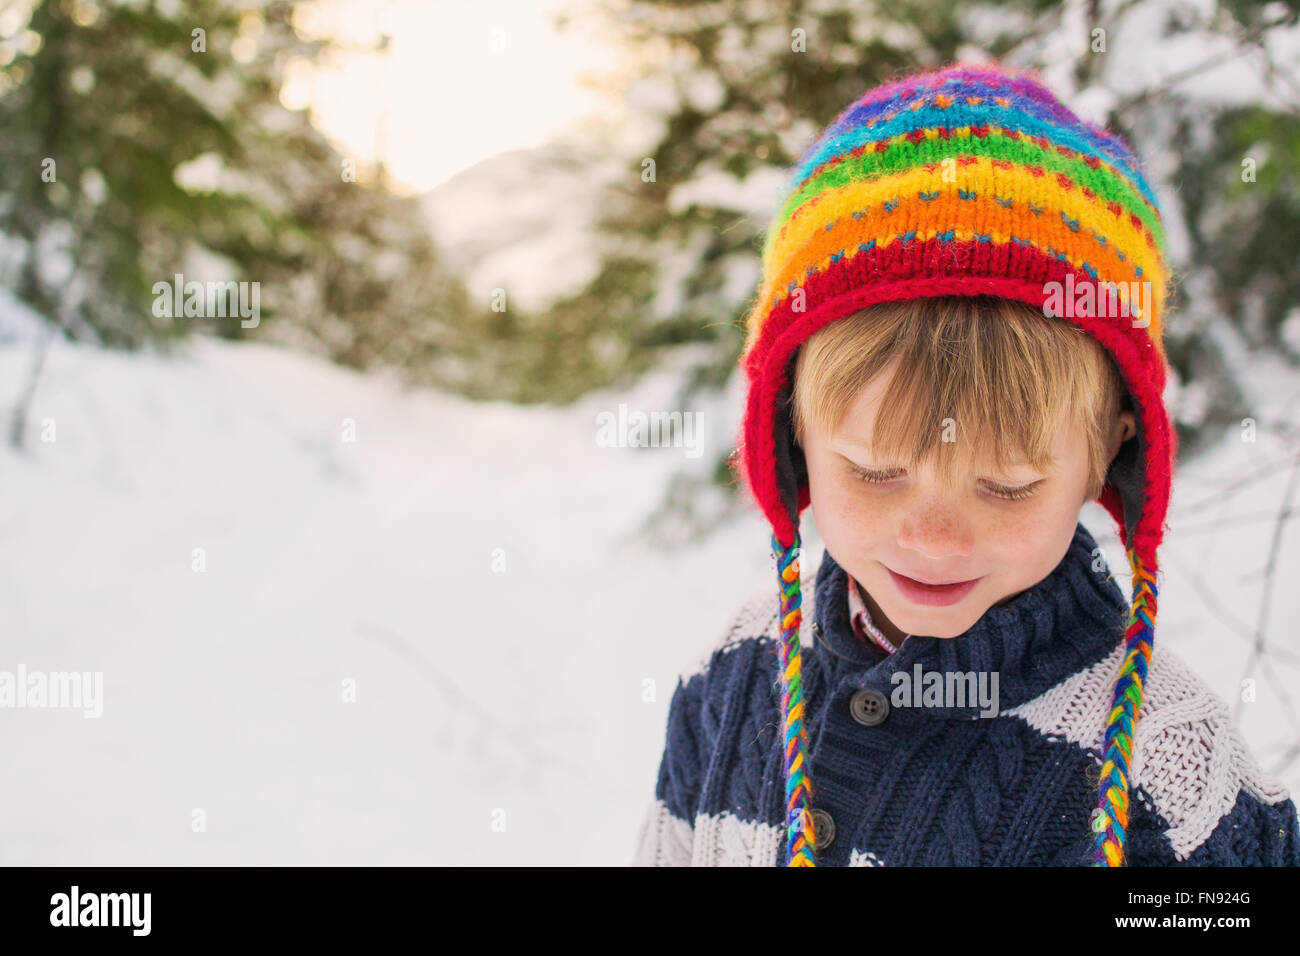 Boy in multi coloured hat in snow looking down Stock Photo